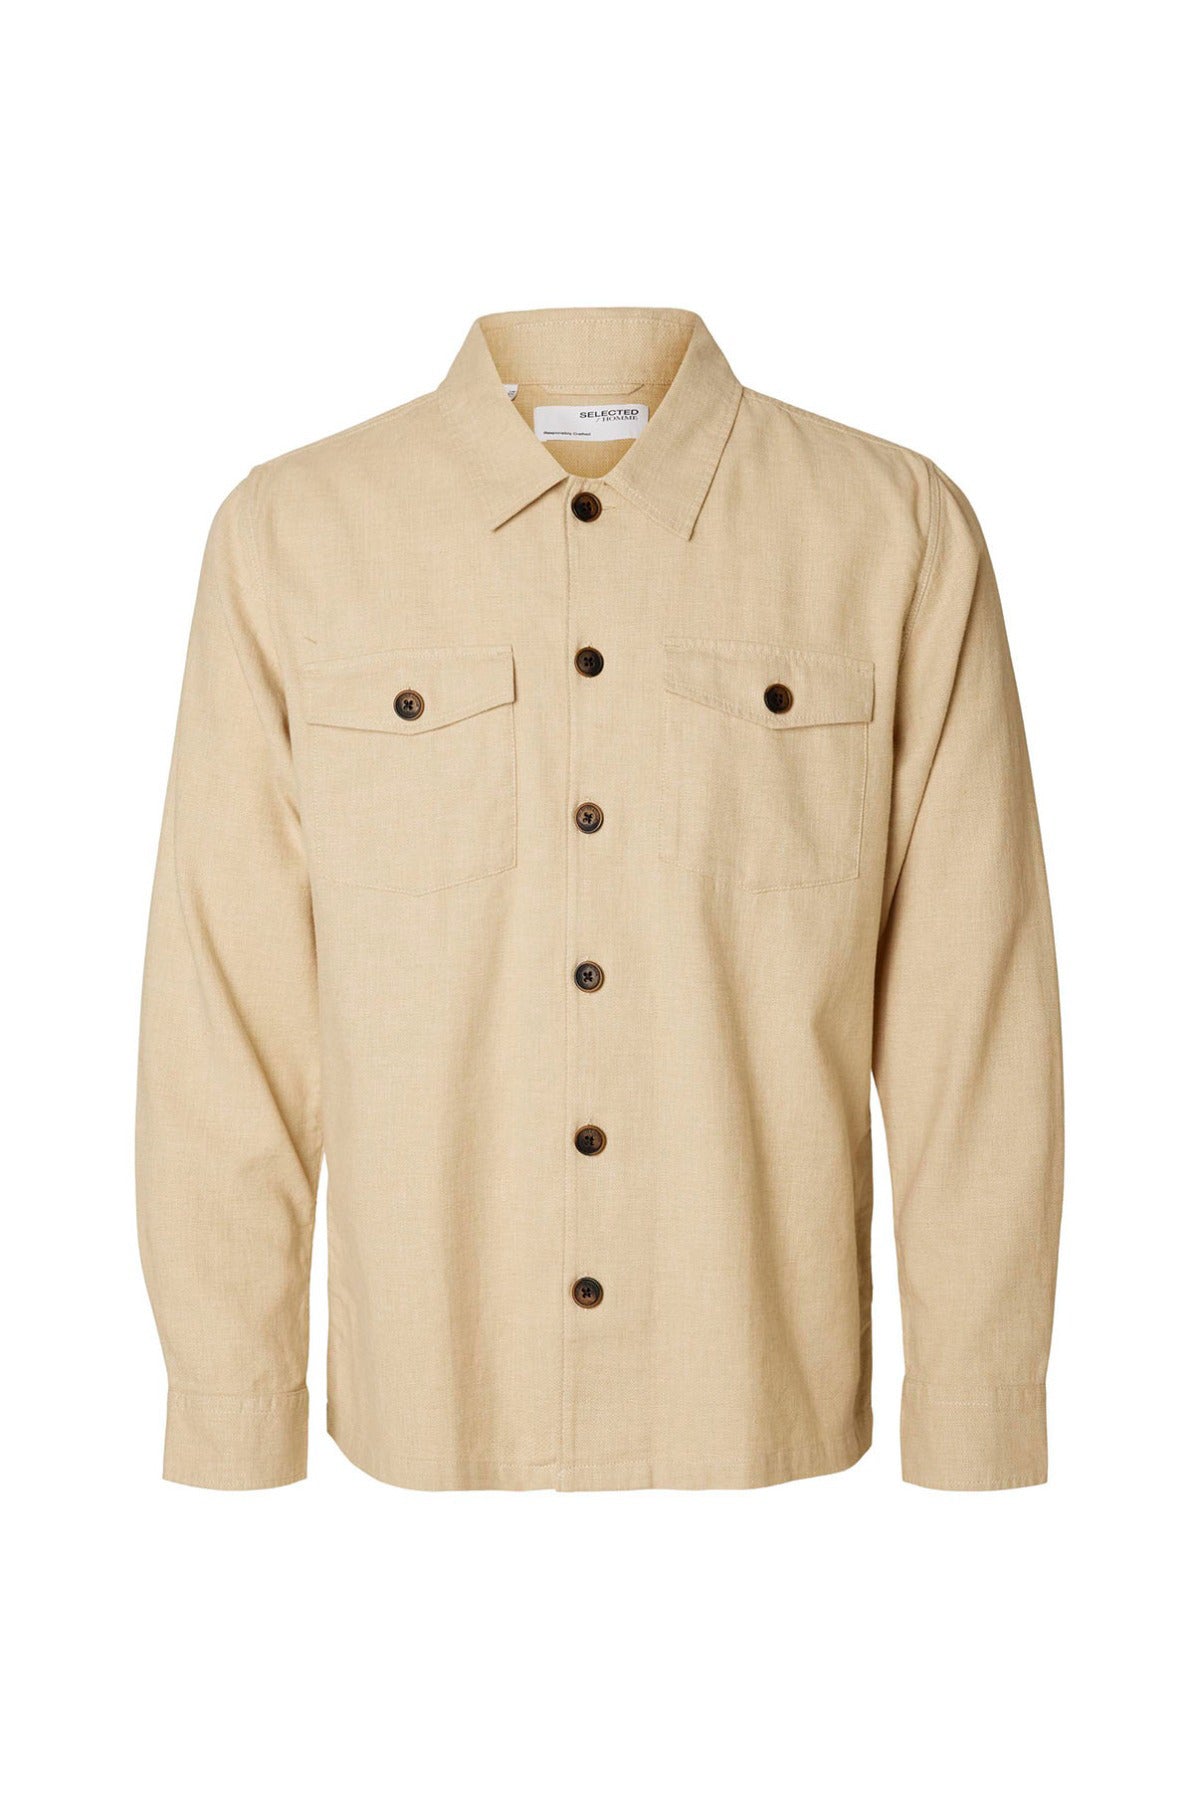 SELECTED HOMME Overshirt Brody